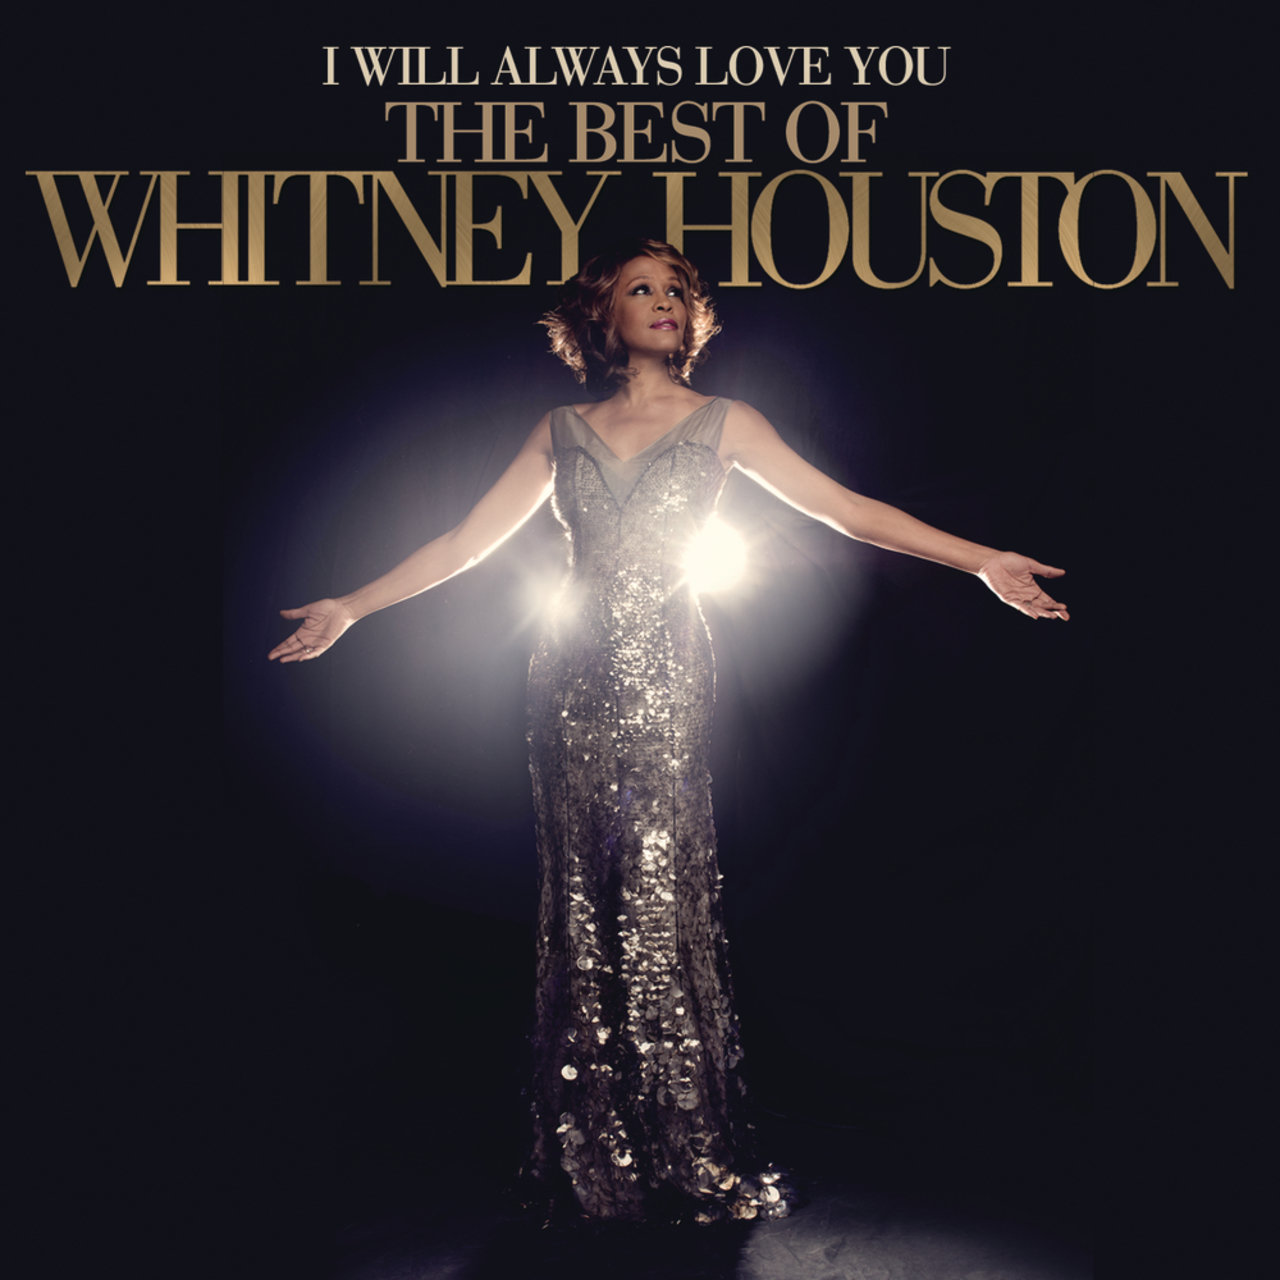 Whitney Houston Complete Discography Torrent Download